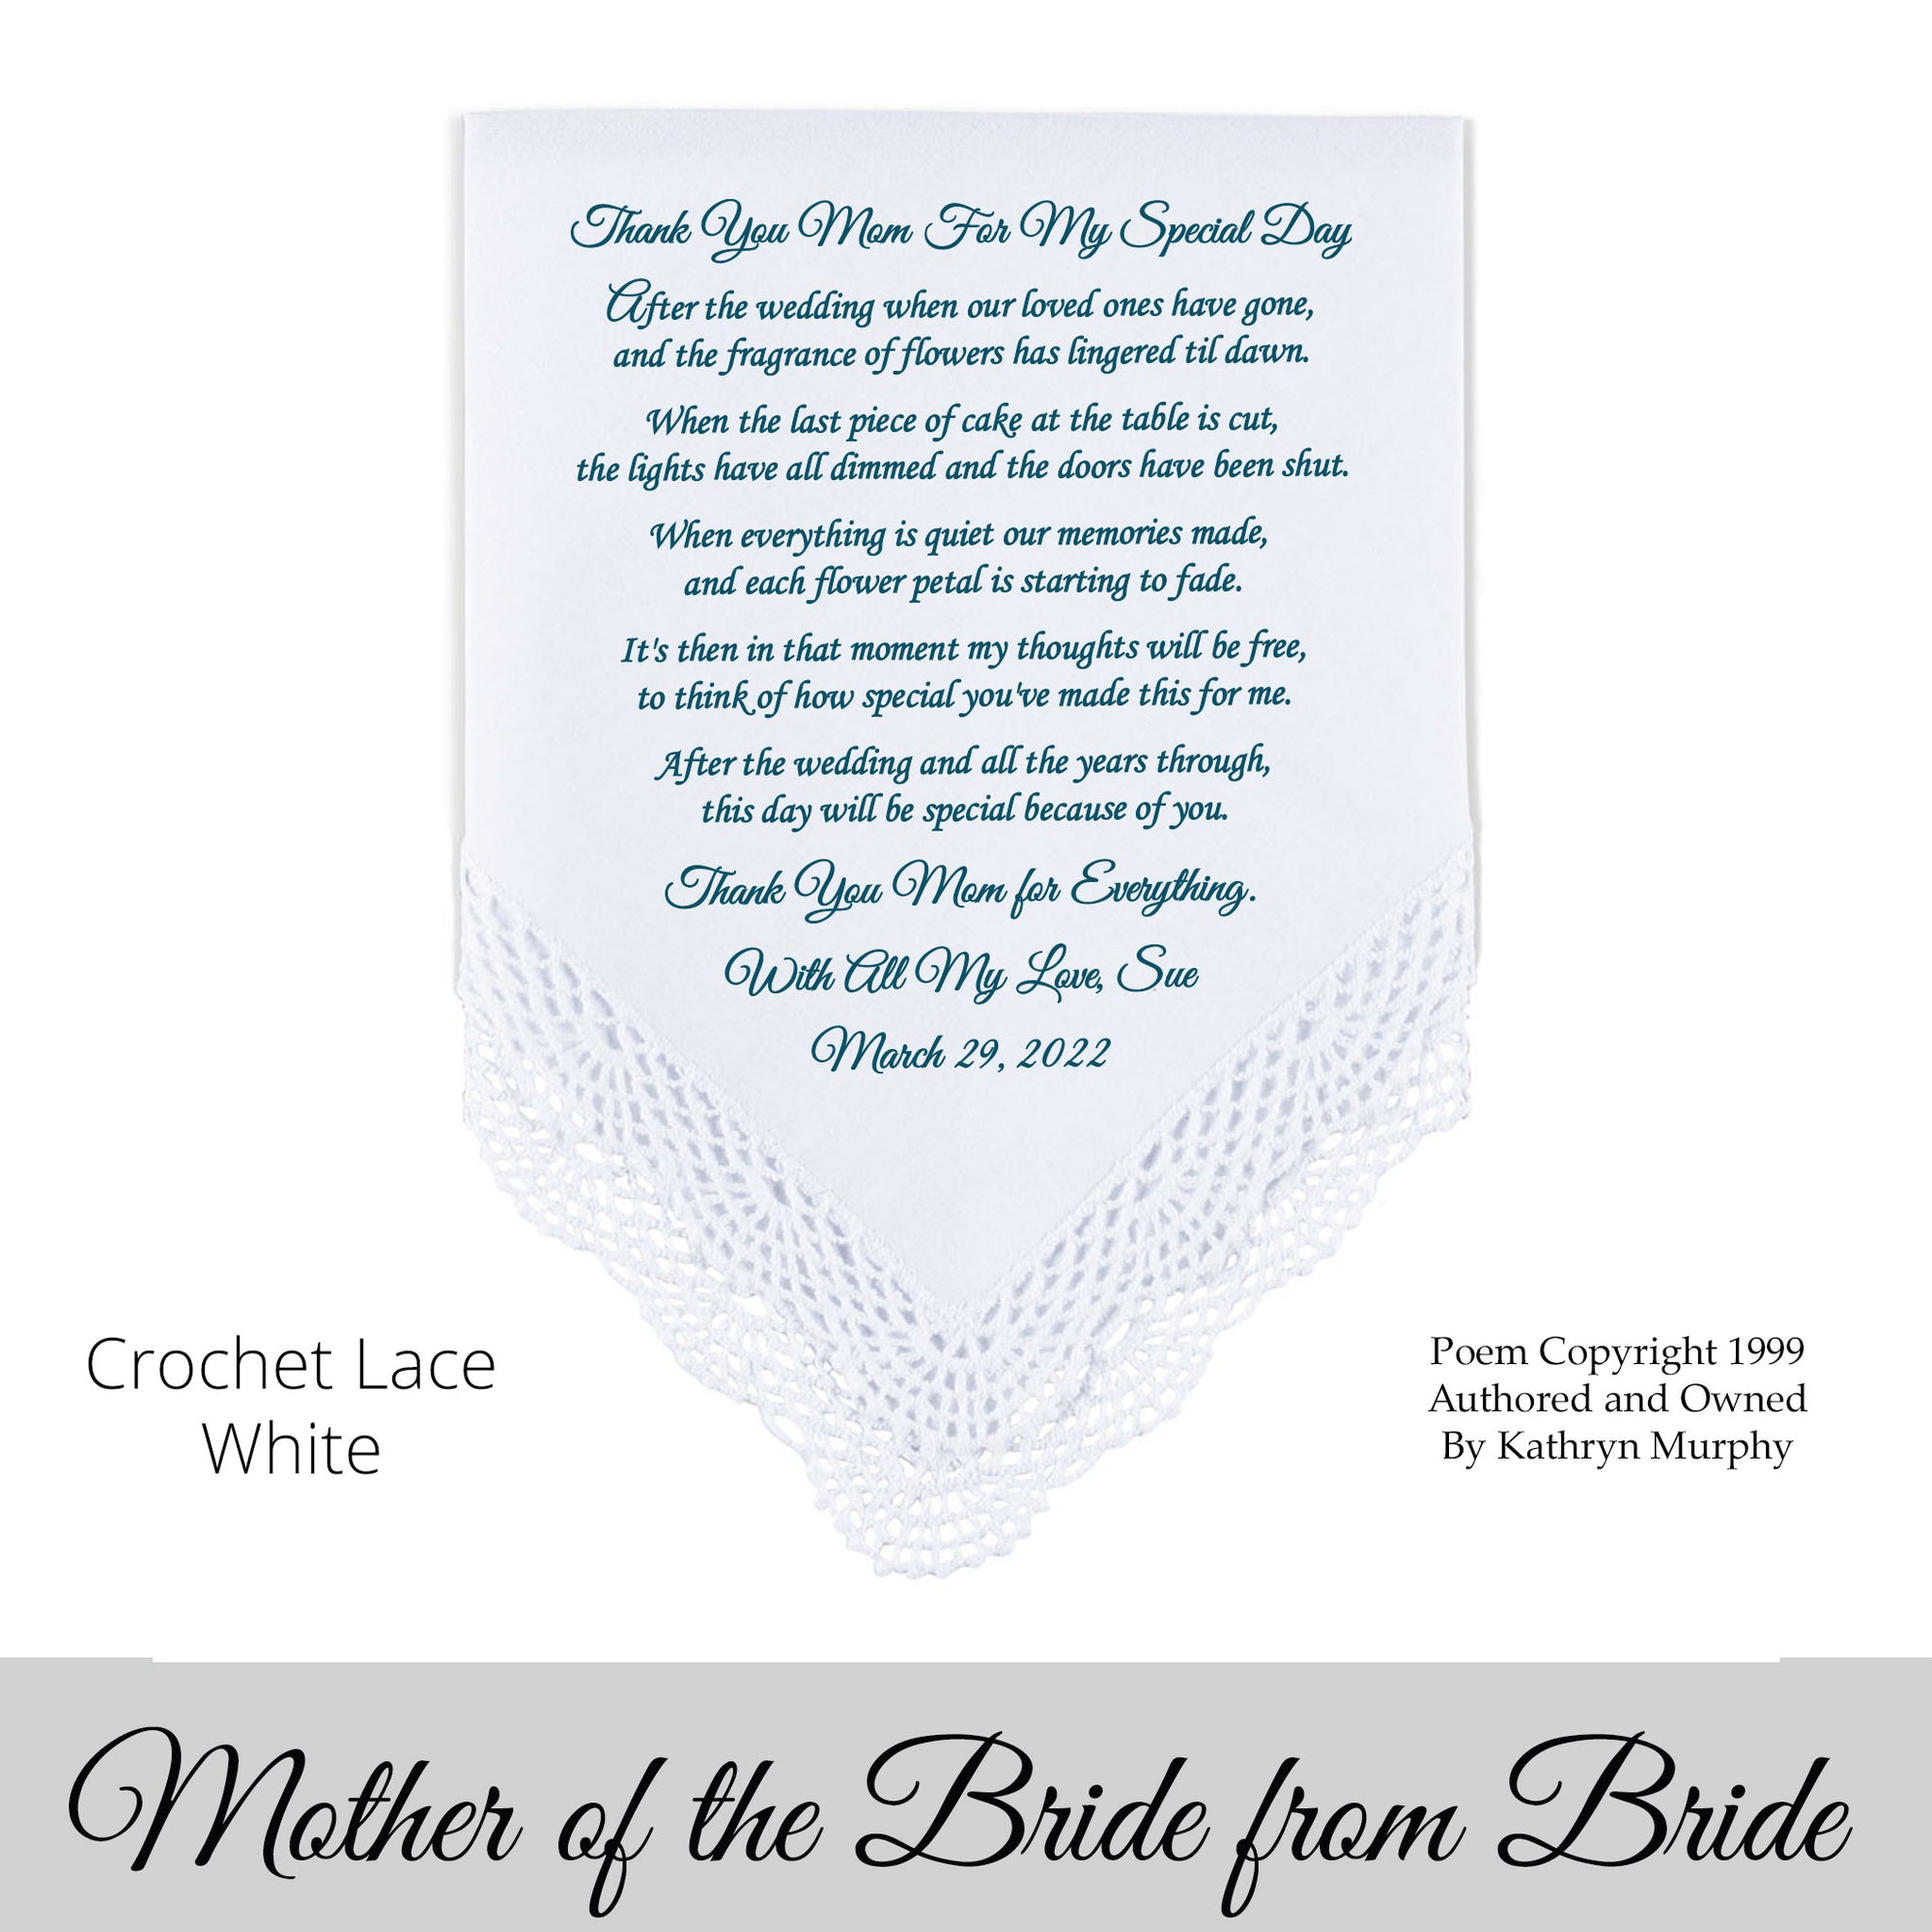 Wedding hankie for the mother of the bride with a printed poem 